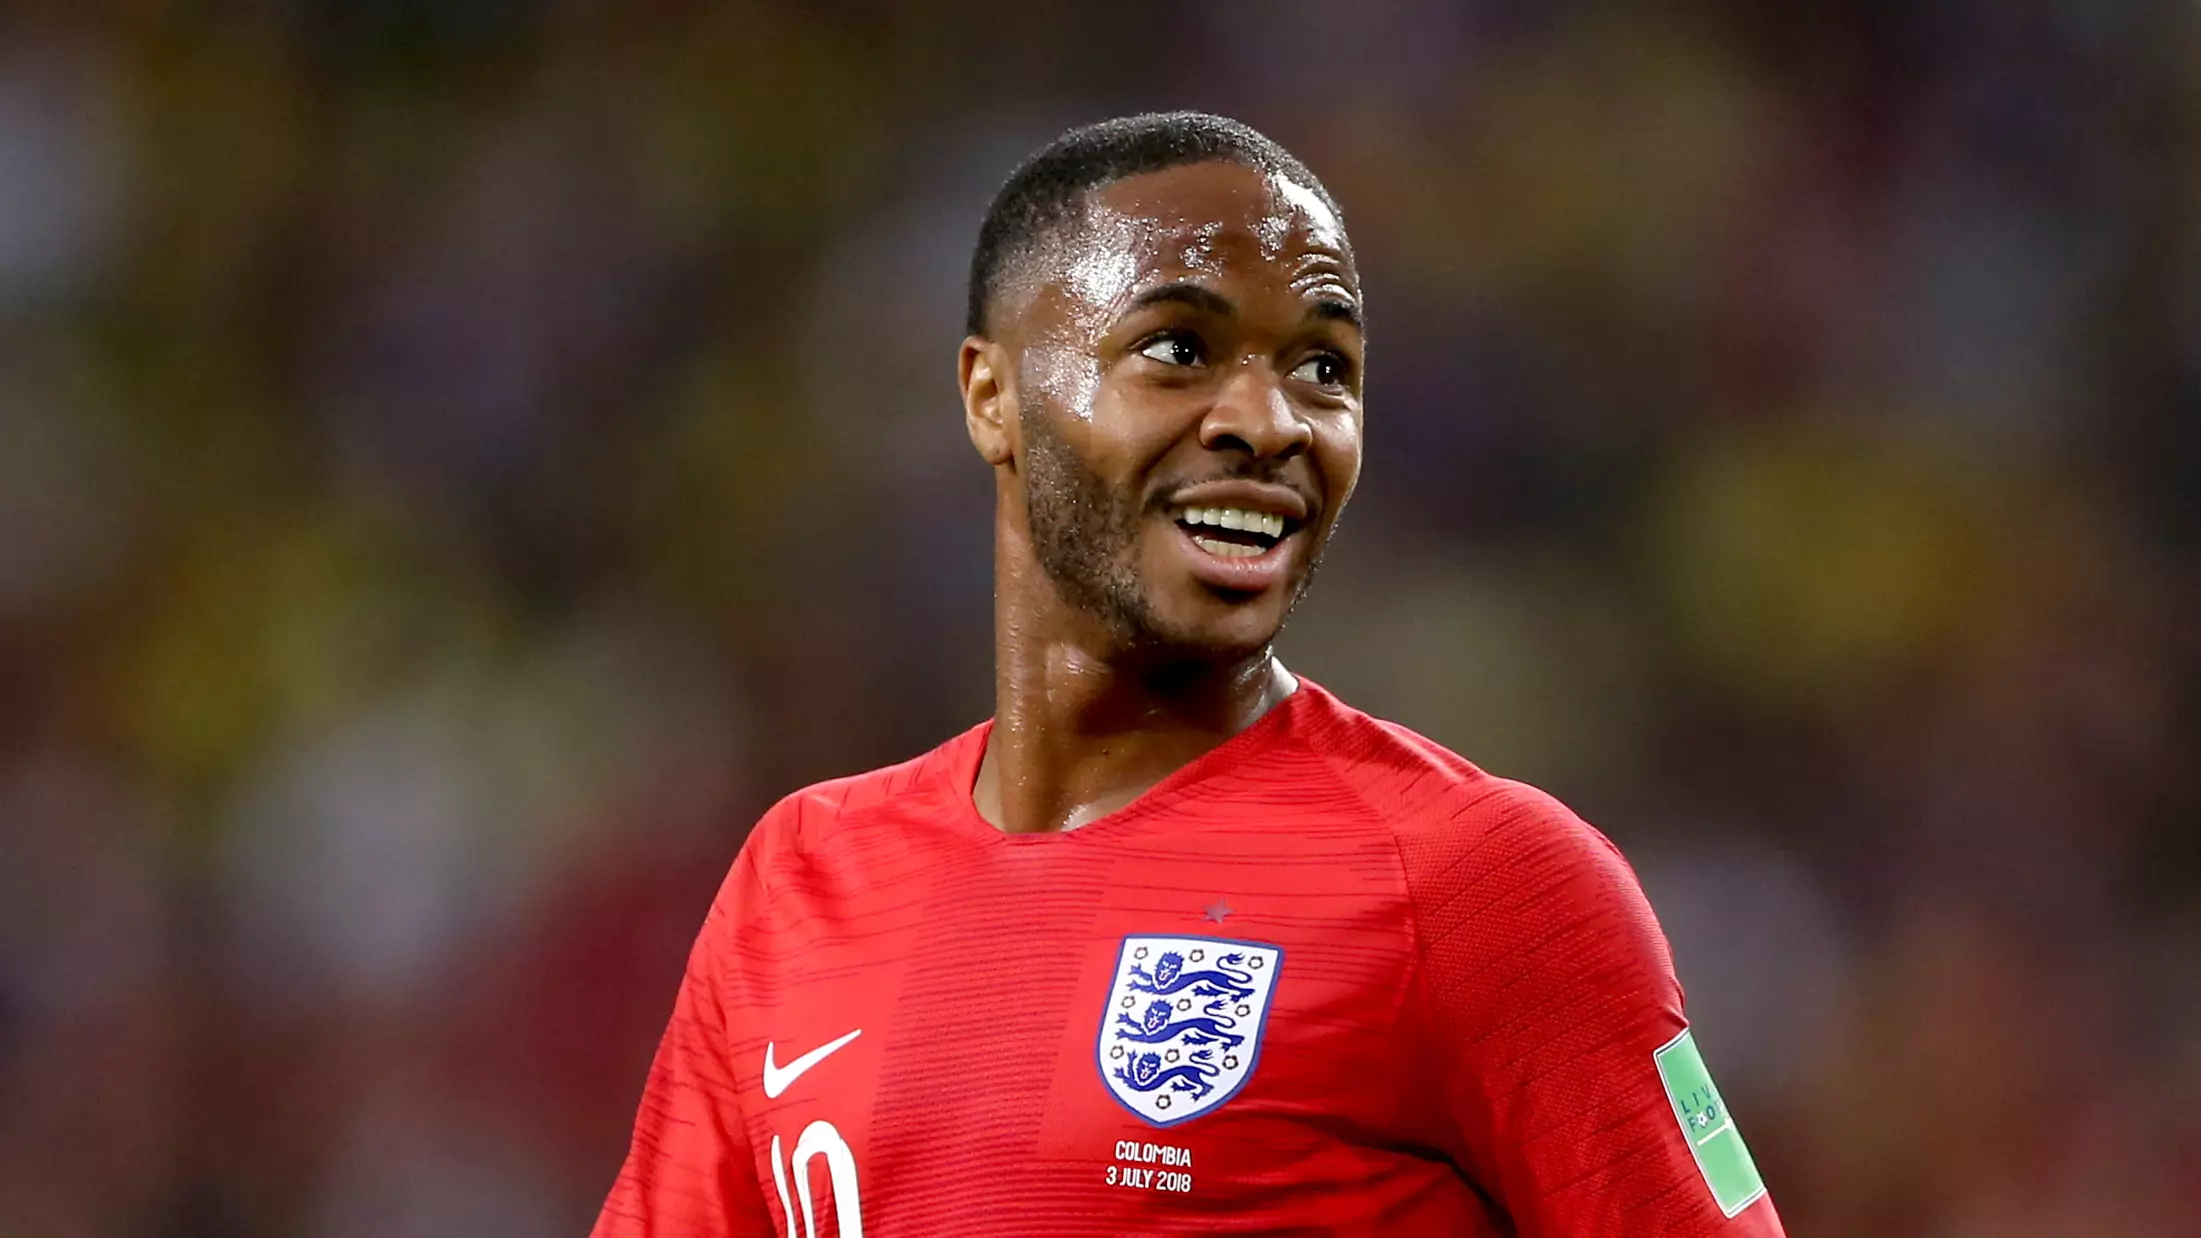 Raheem Sterling's Performance Against Sweden Is Causing Disputes Between Fans And Experts